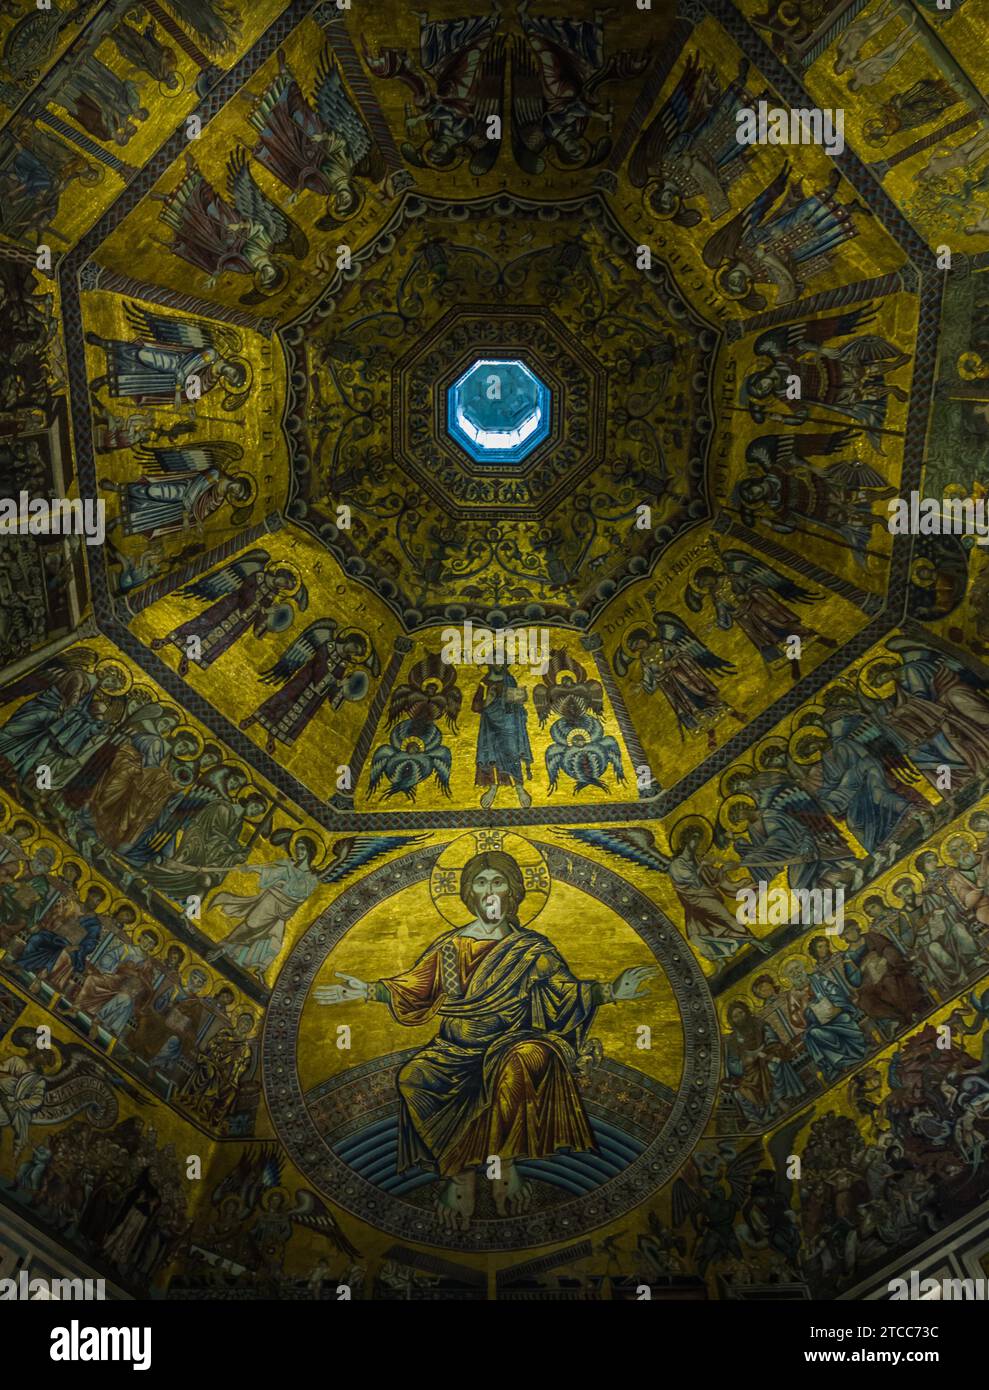 A picture of the artwork on the ceiling of The Baptistery of St. John (Florence) Stock Photo